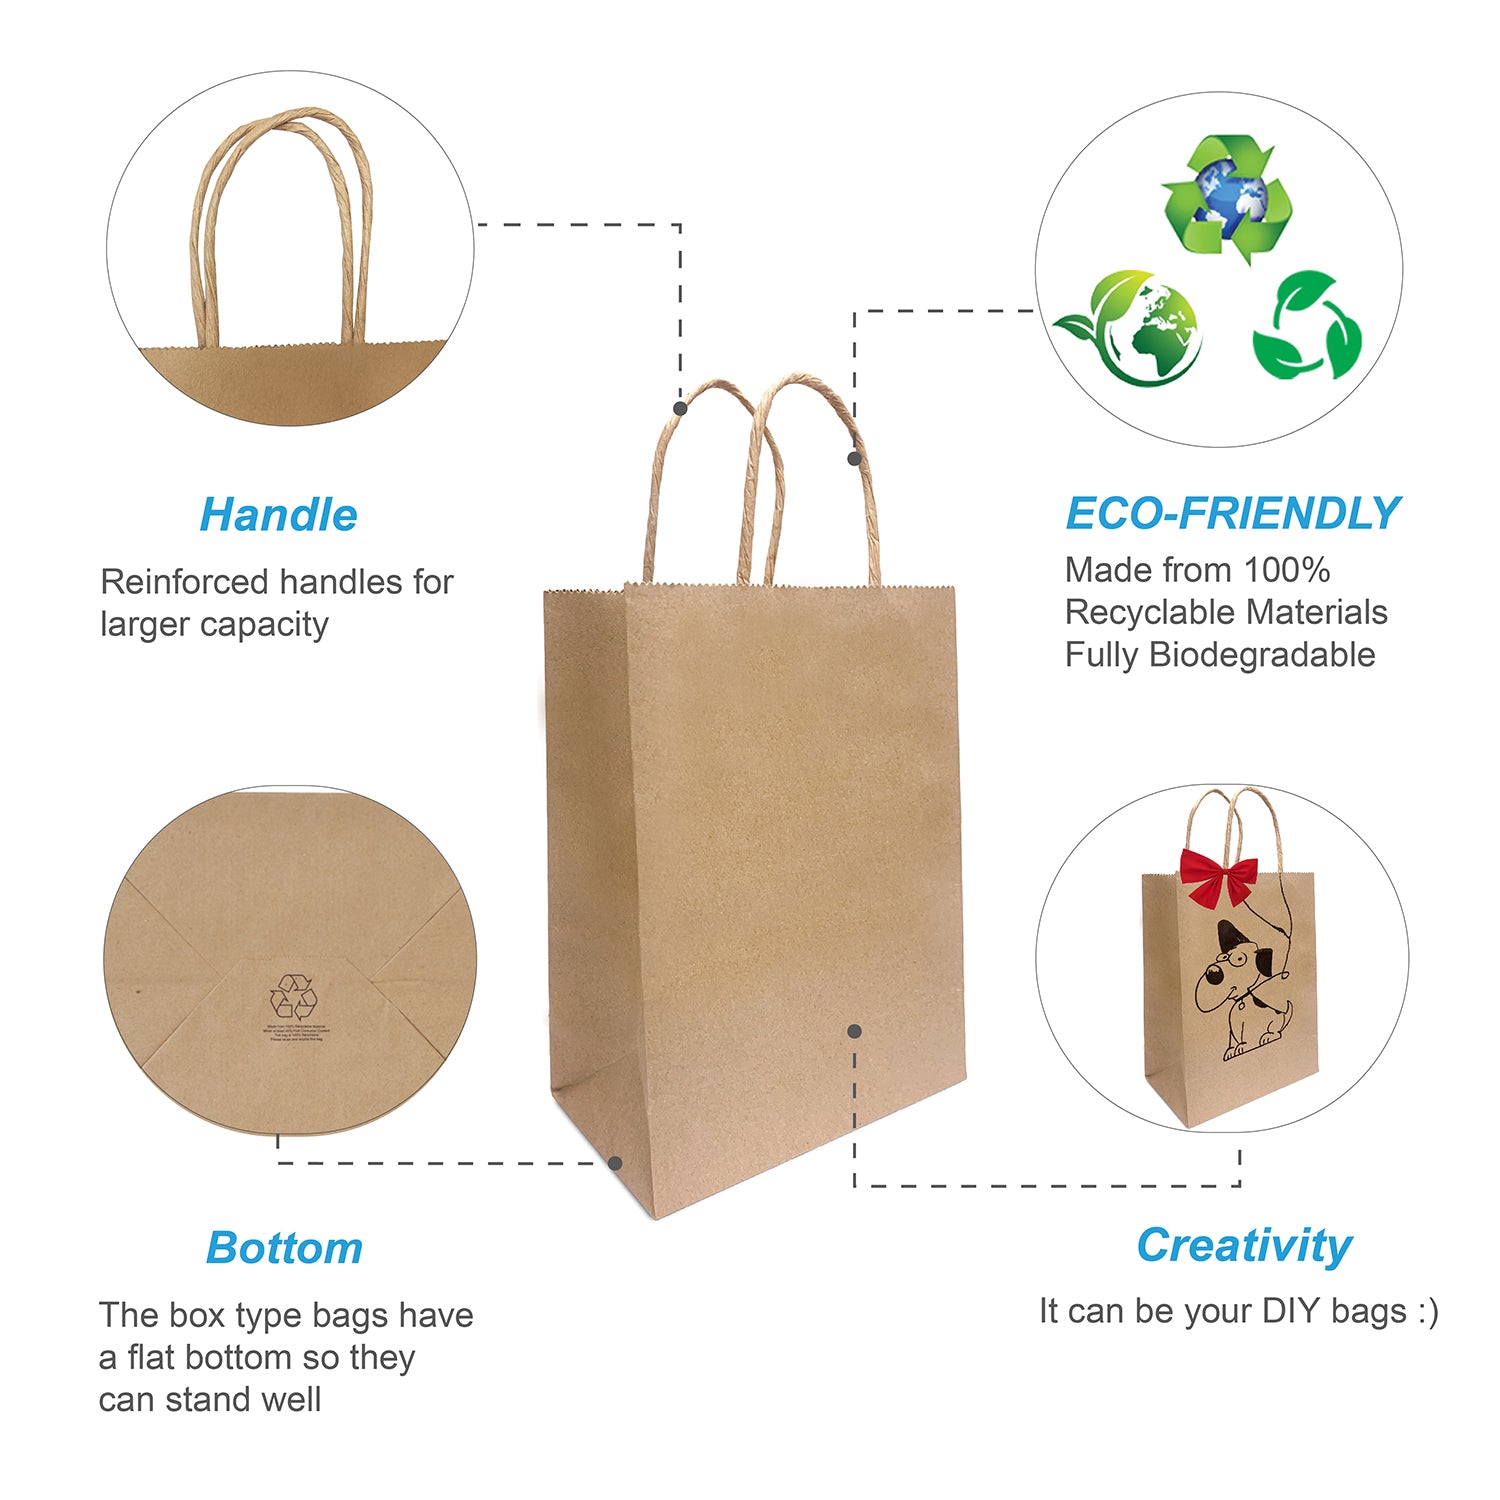 250 Pcs, Gem, 5.3x3.5x8.5 inches, Kraft Paper Bags, with Twisted Handle